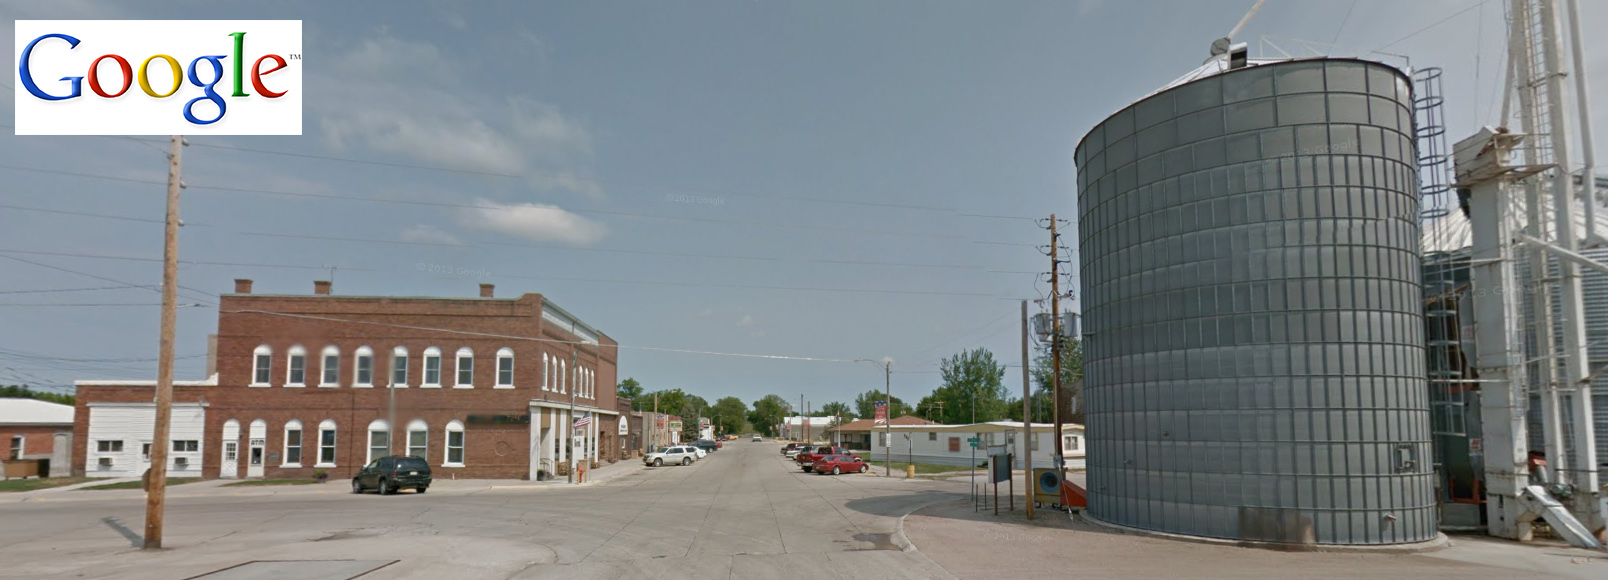 PHOTO: South Main Street in Pilger, Neb. is seen in this undated Google map before the tornado in Nebraska struck, June 16, 2014.